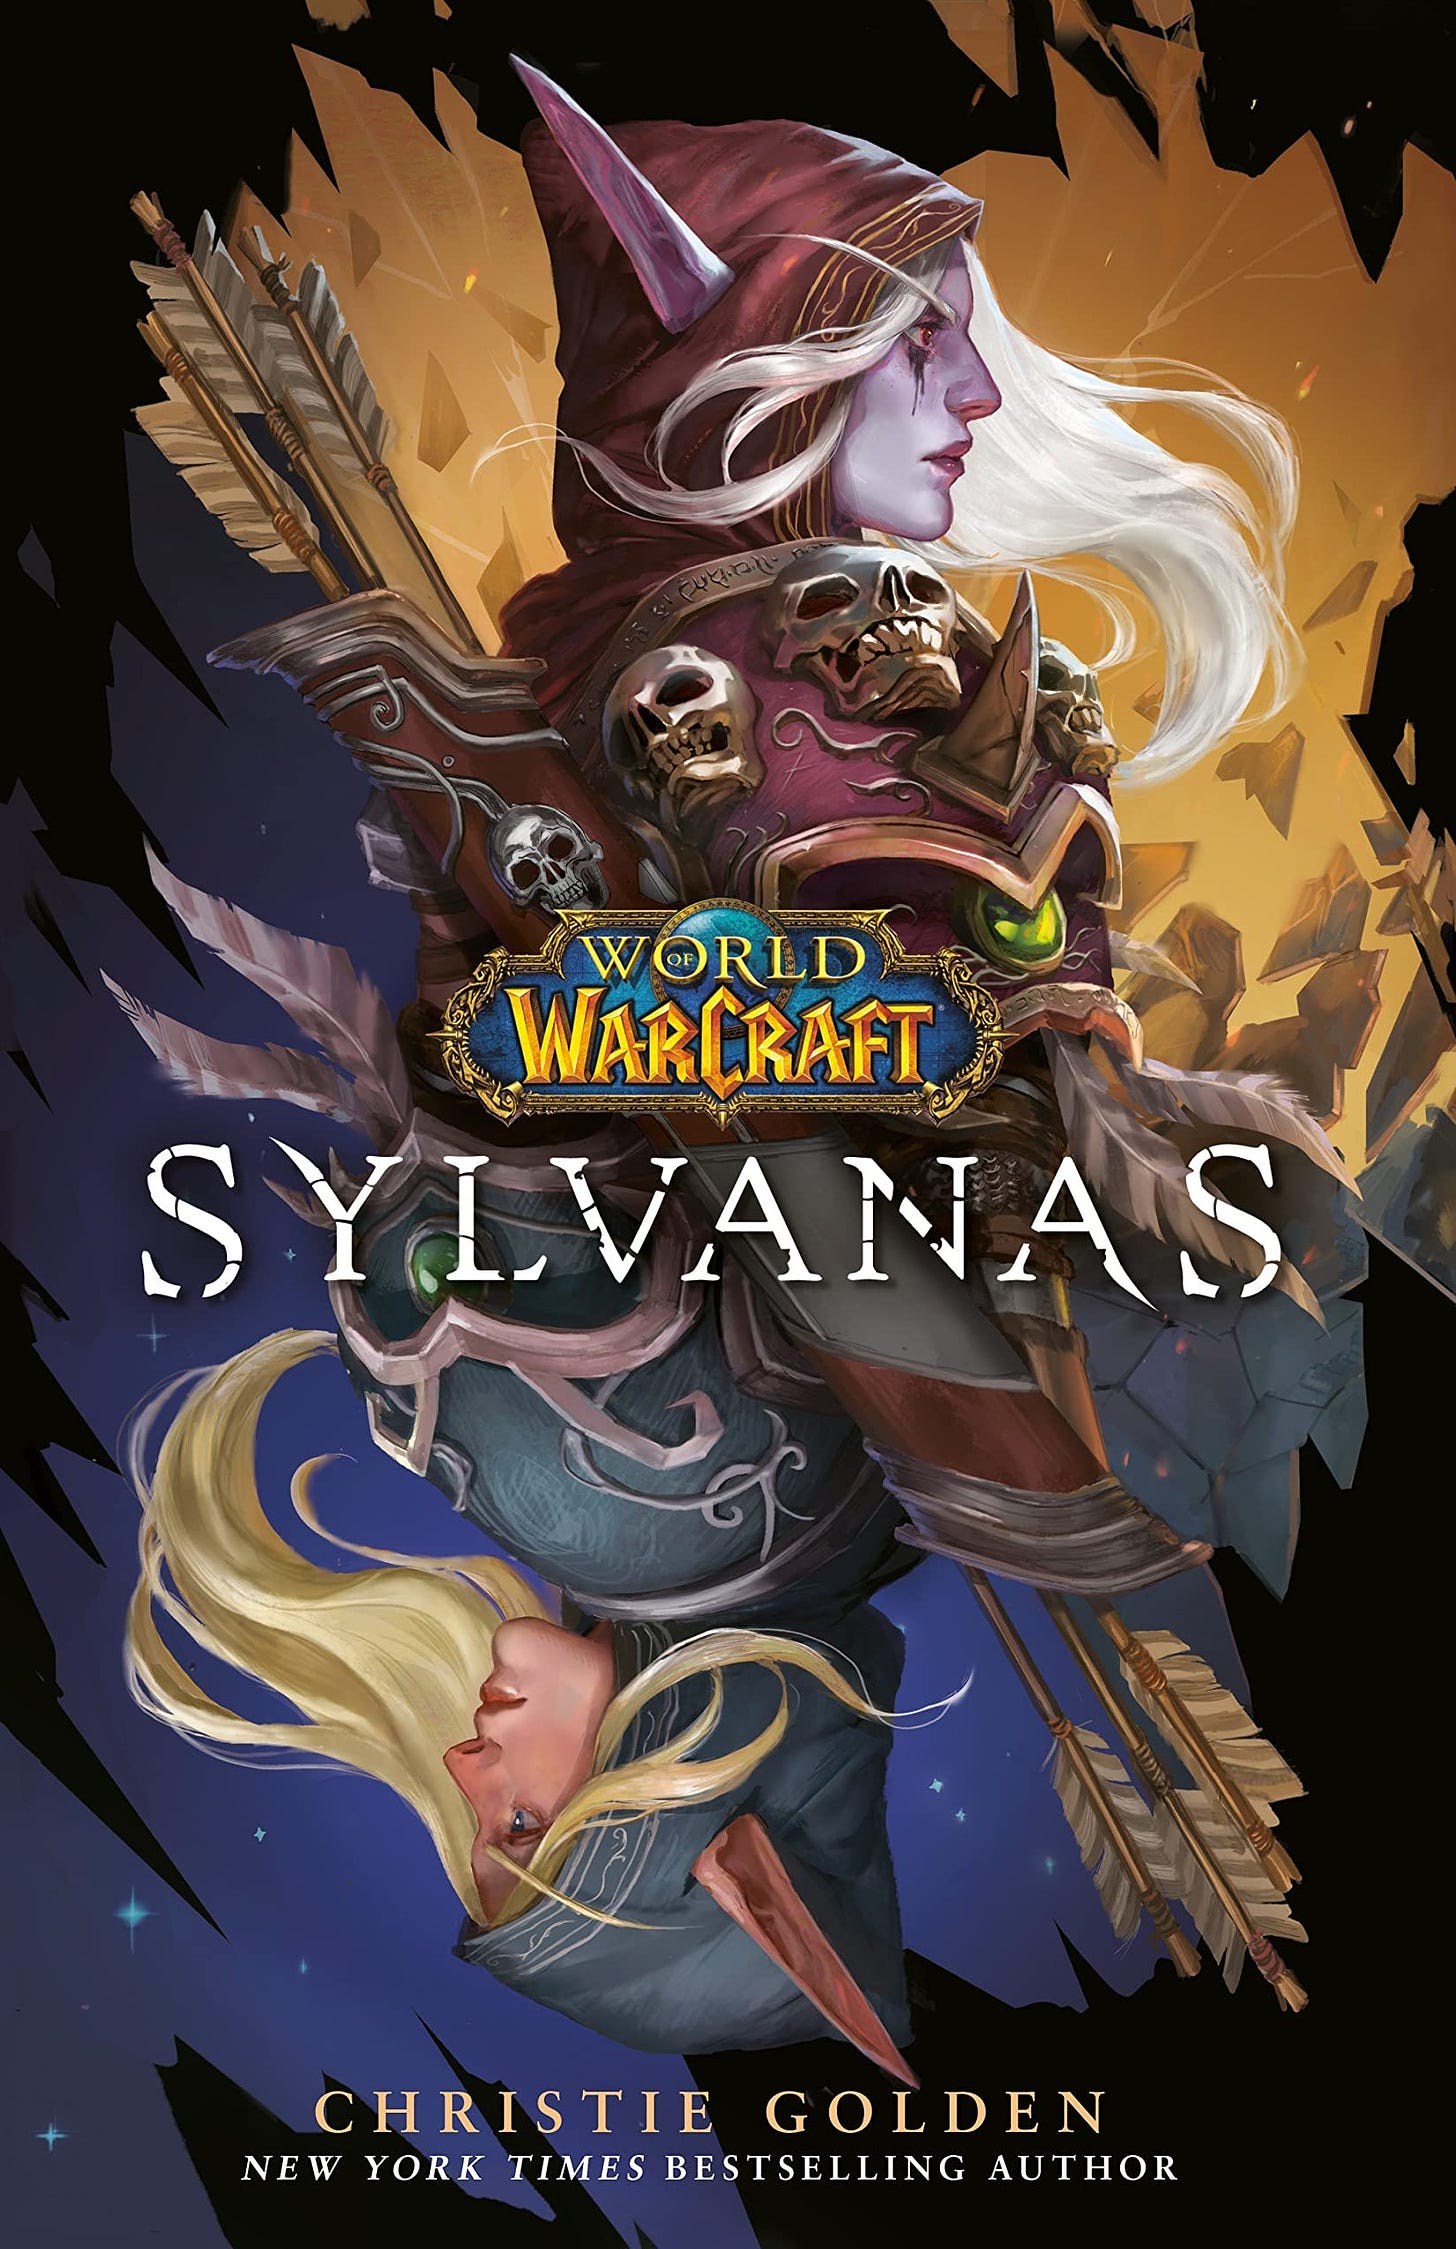 The cover of Christie Golden’s upcoming Sylvanas novel, available March 29, 2022